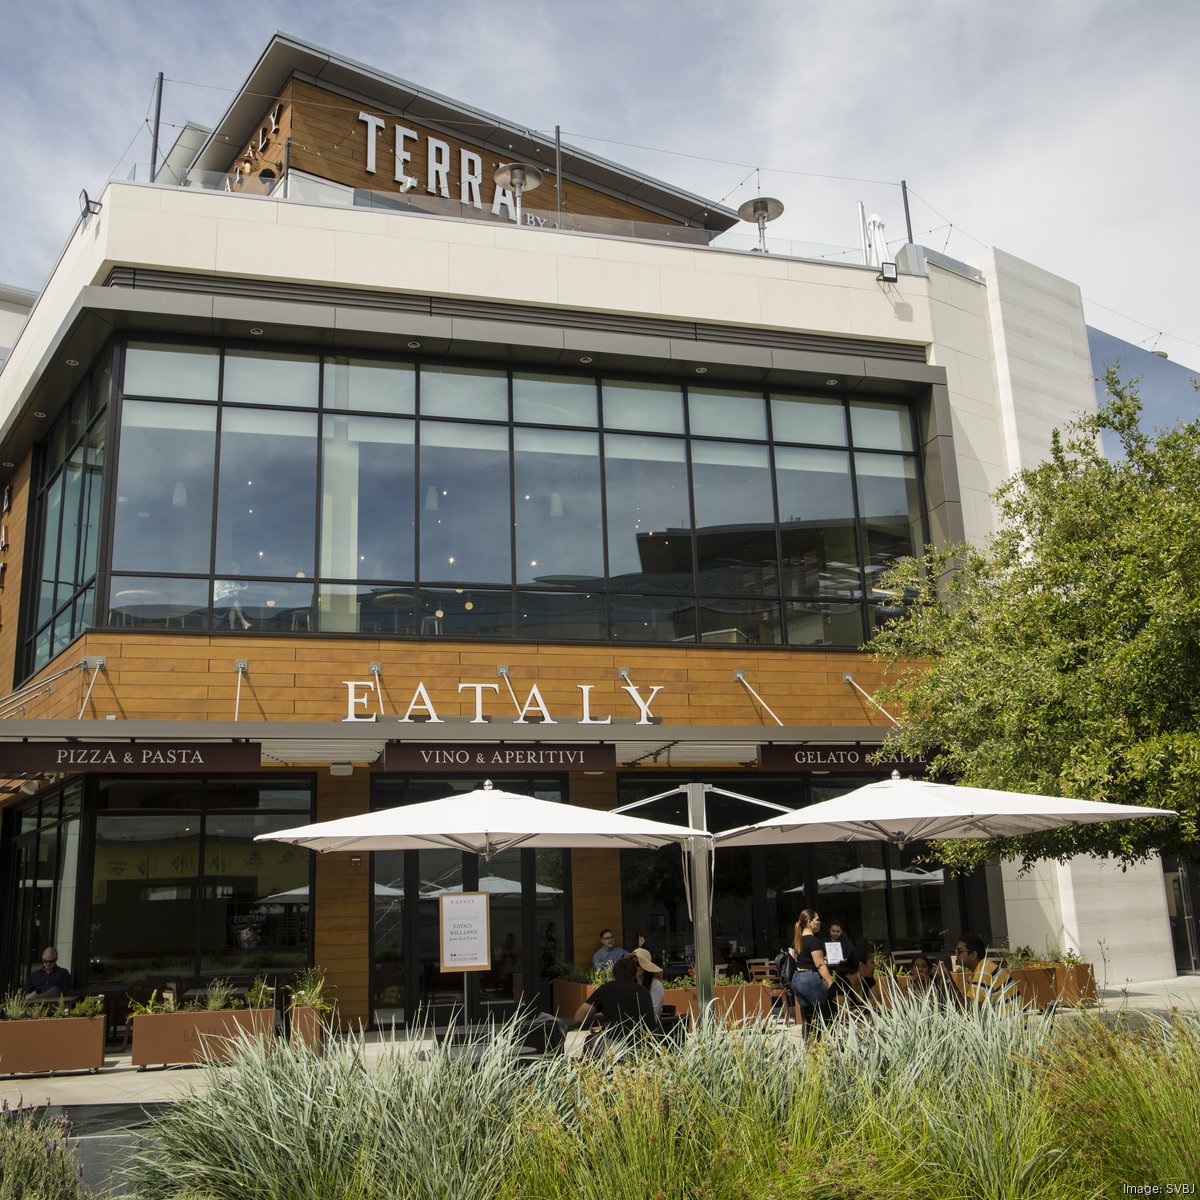 Food mecca Eataly readying to open new three-story location at Valley